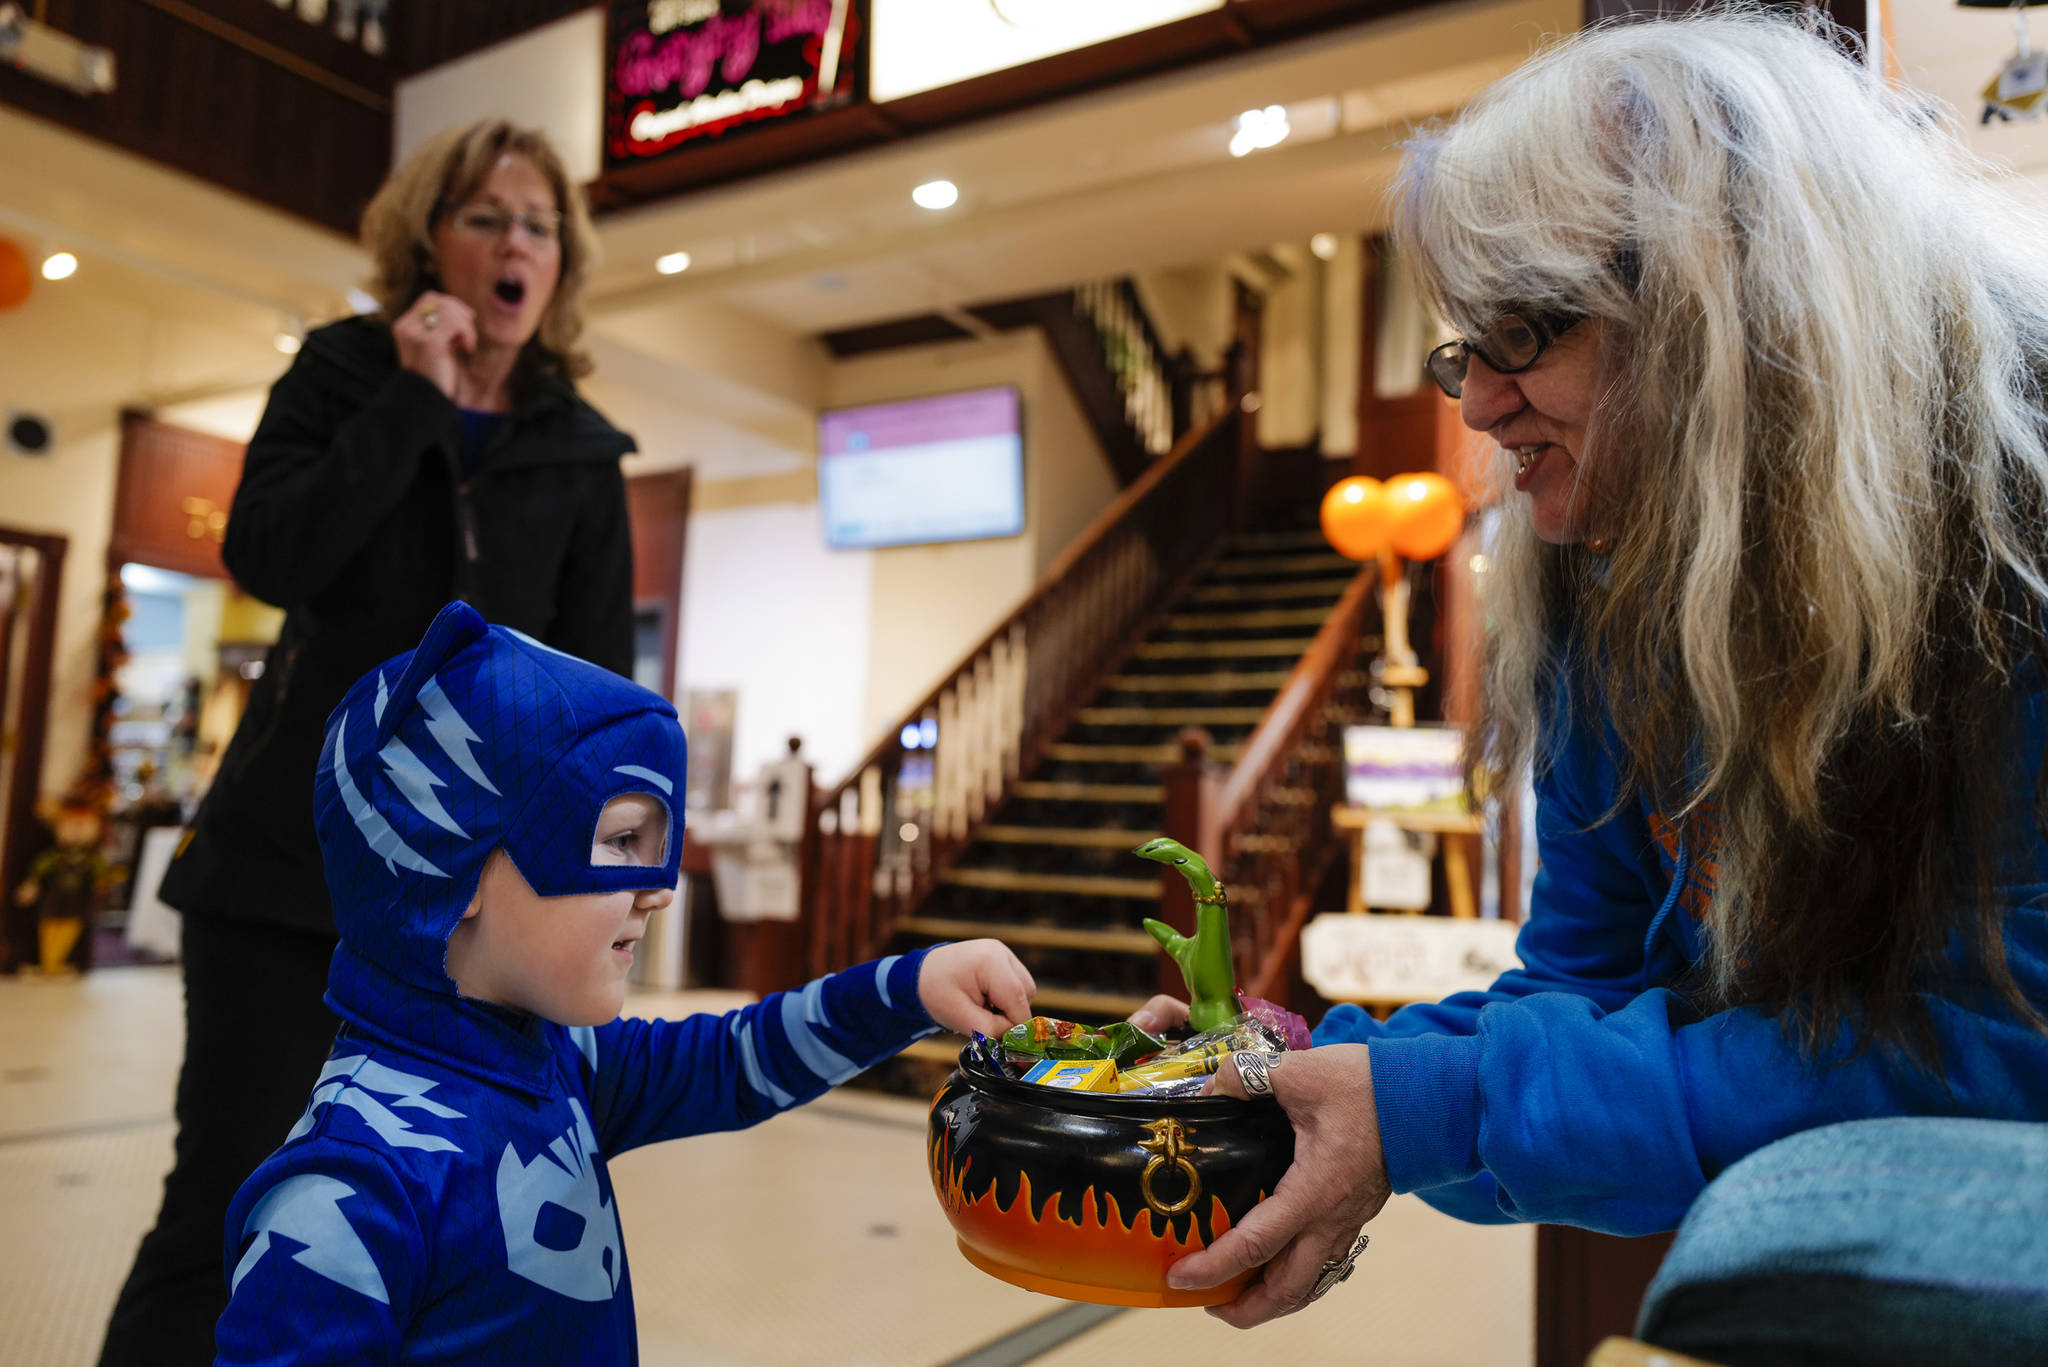 Dorain Gross, left, reacts as her grandson, Thorin Lombard, 3, reaches for a candy dish offered by Michelle of The Bear’s Lair during the Trick or Treat Downtown event on Thursday, Oct. 31, 2019. More than 70 business put out orange balloons to participate in the event aimed at young children. (Michael Penn | Juneau Empire)